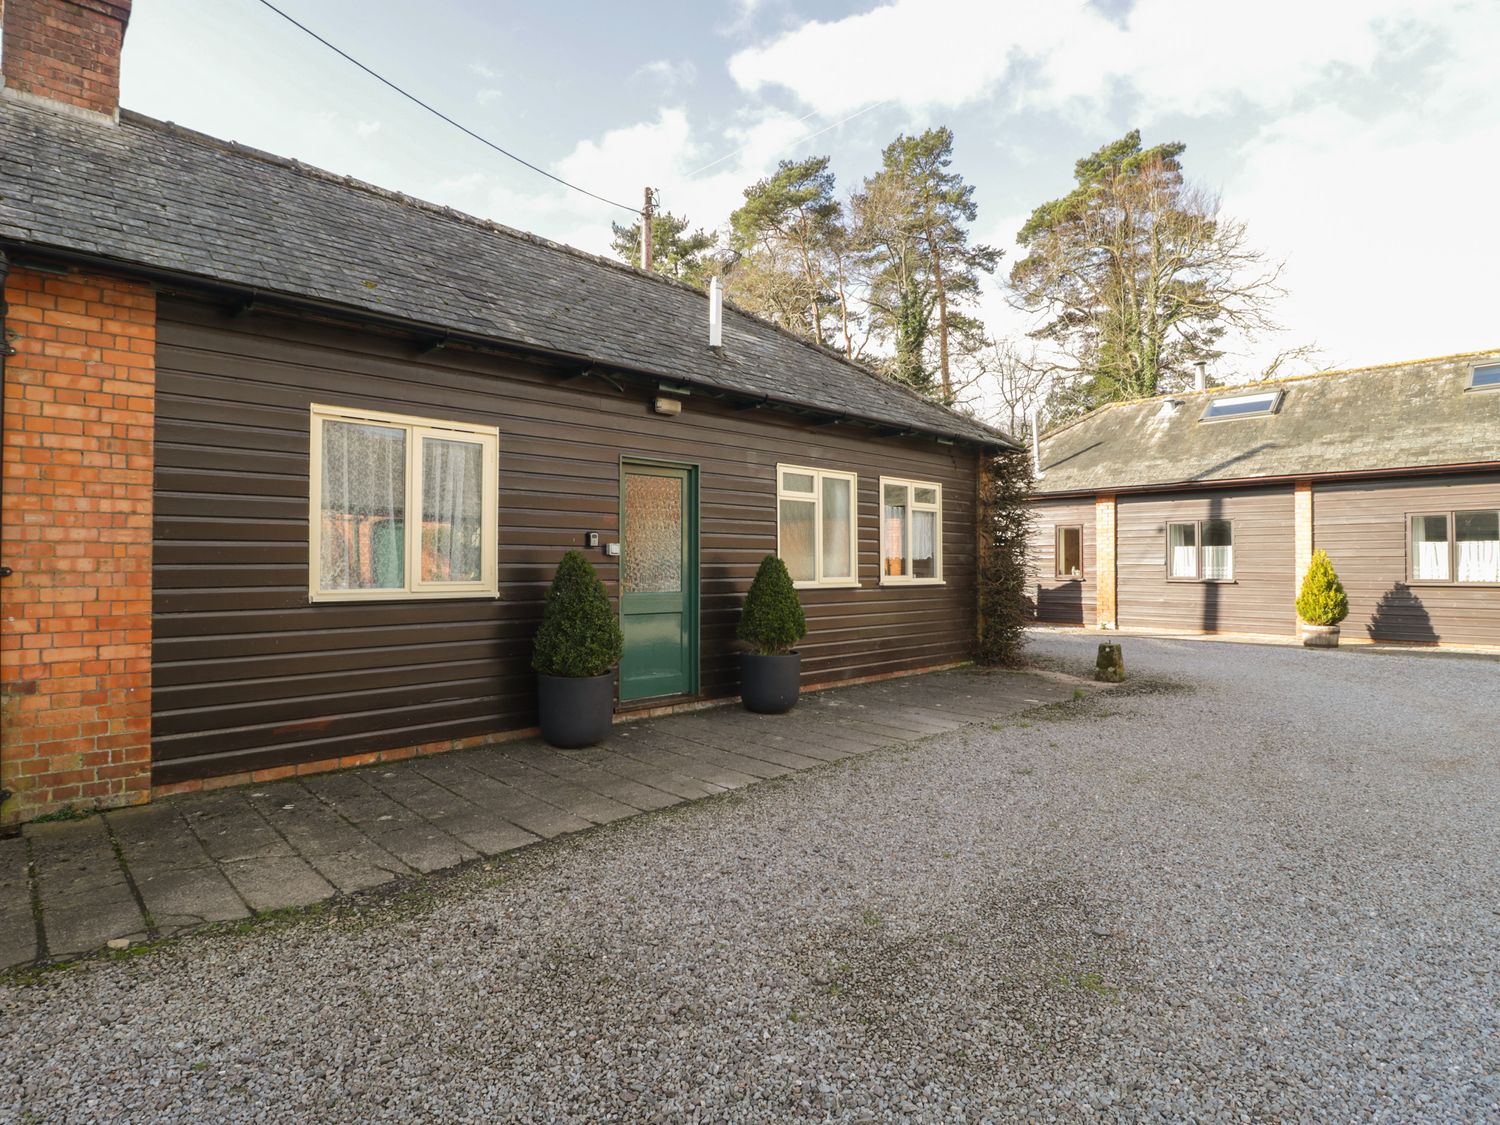 Stable Cottage - Somerset & Wiltshire - 1050593 - photo 1